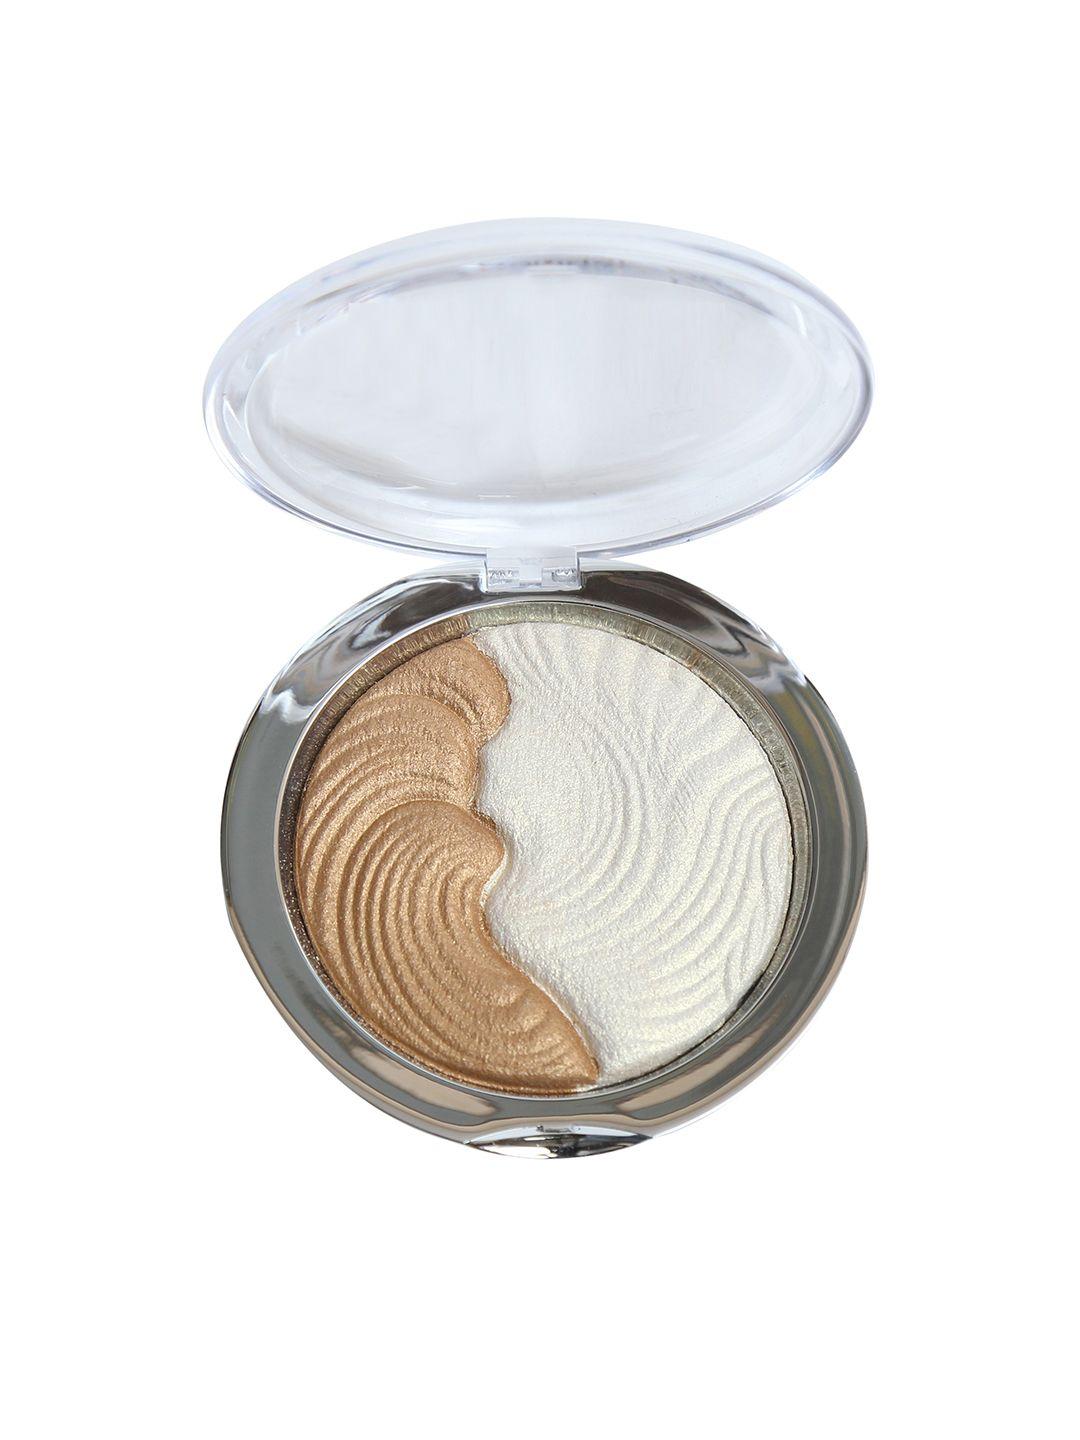 miss claire 04 baked powder duo 7 g